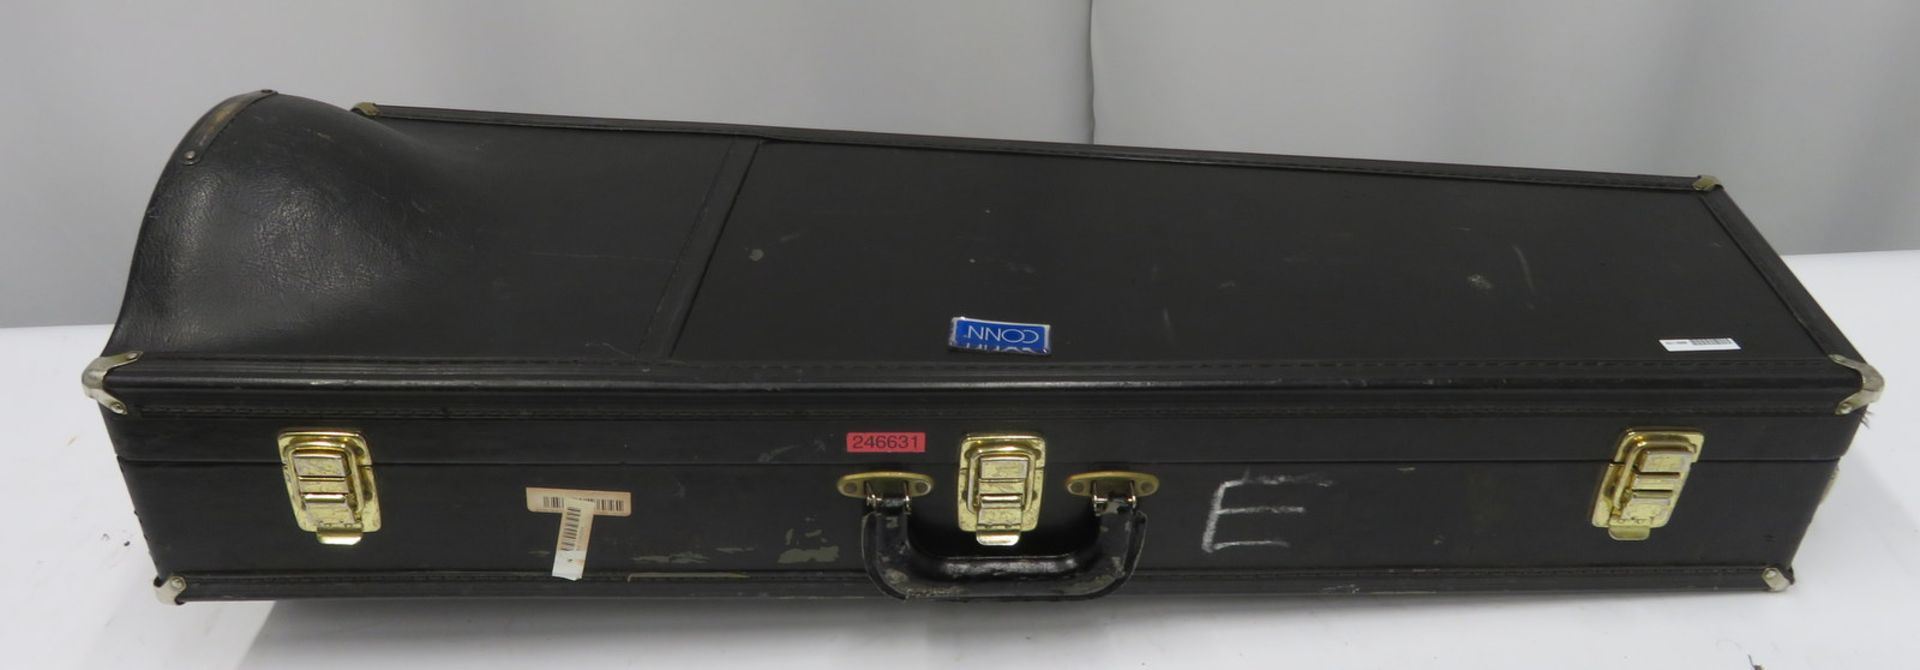 Conn 88H trombone with case. Serial number: 246631. - Image 15 of 15